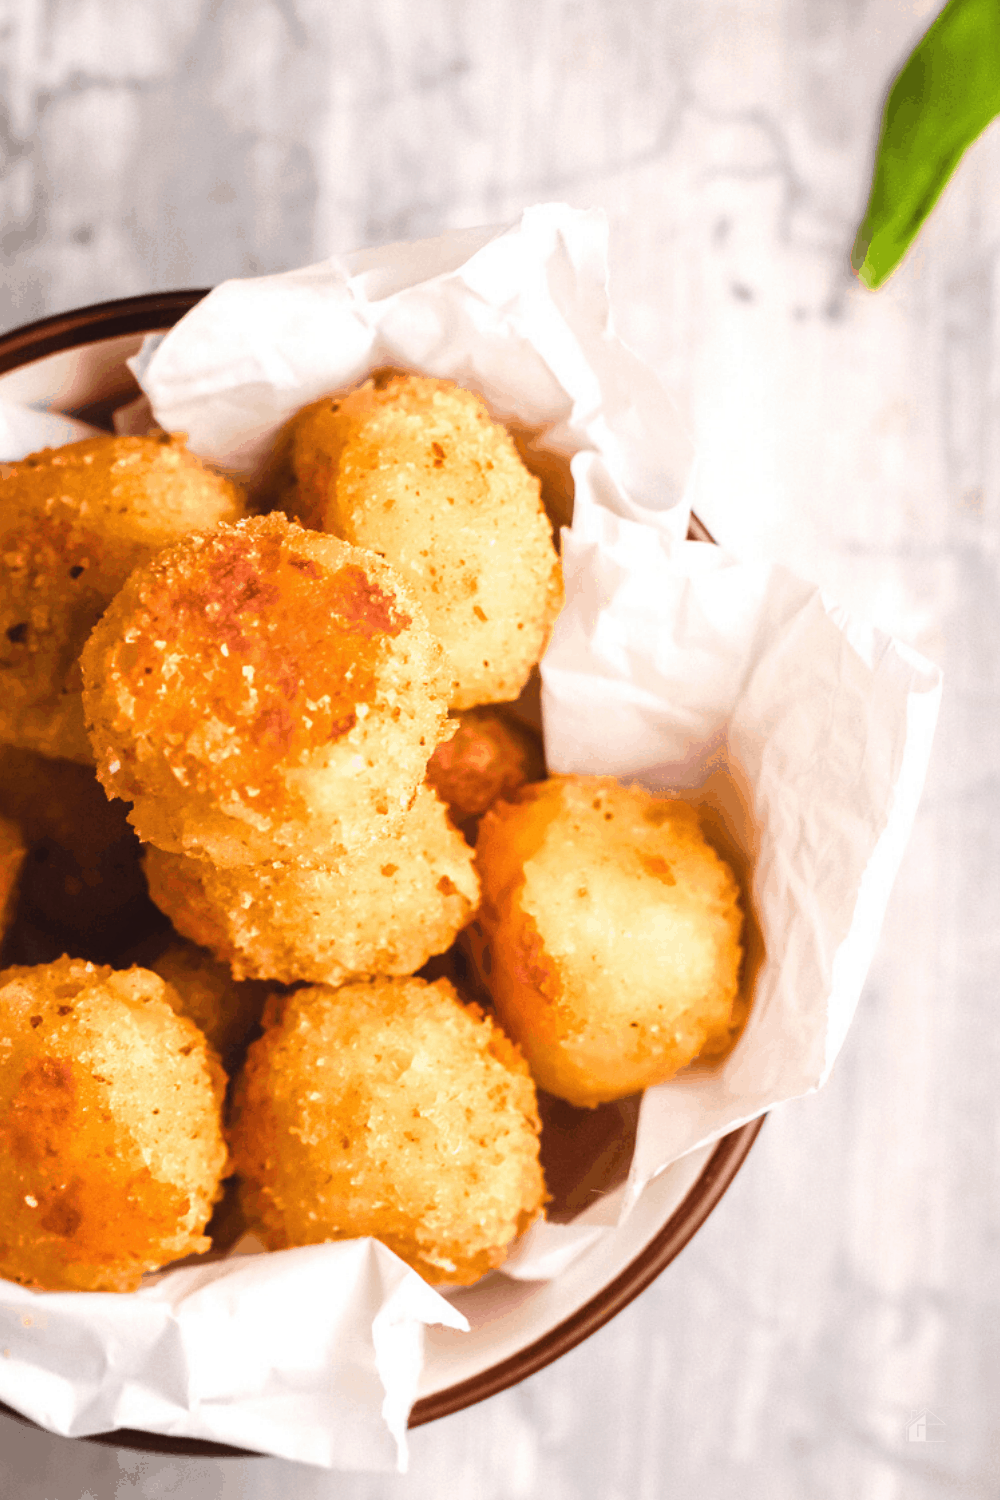 Learn how to make this simple and delicious fried cheese balls Puerto Rican style. Bolitas de Quesos are easy to make with ingredients you already have! via @mystayathome